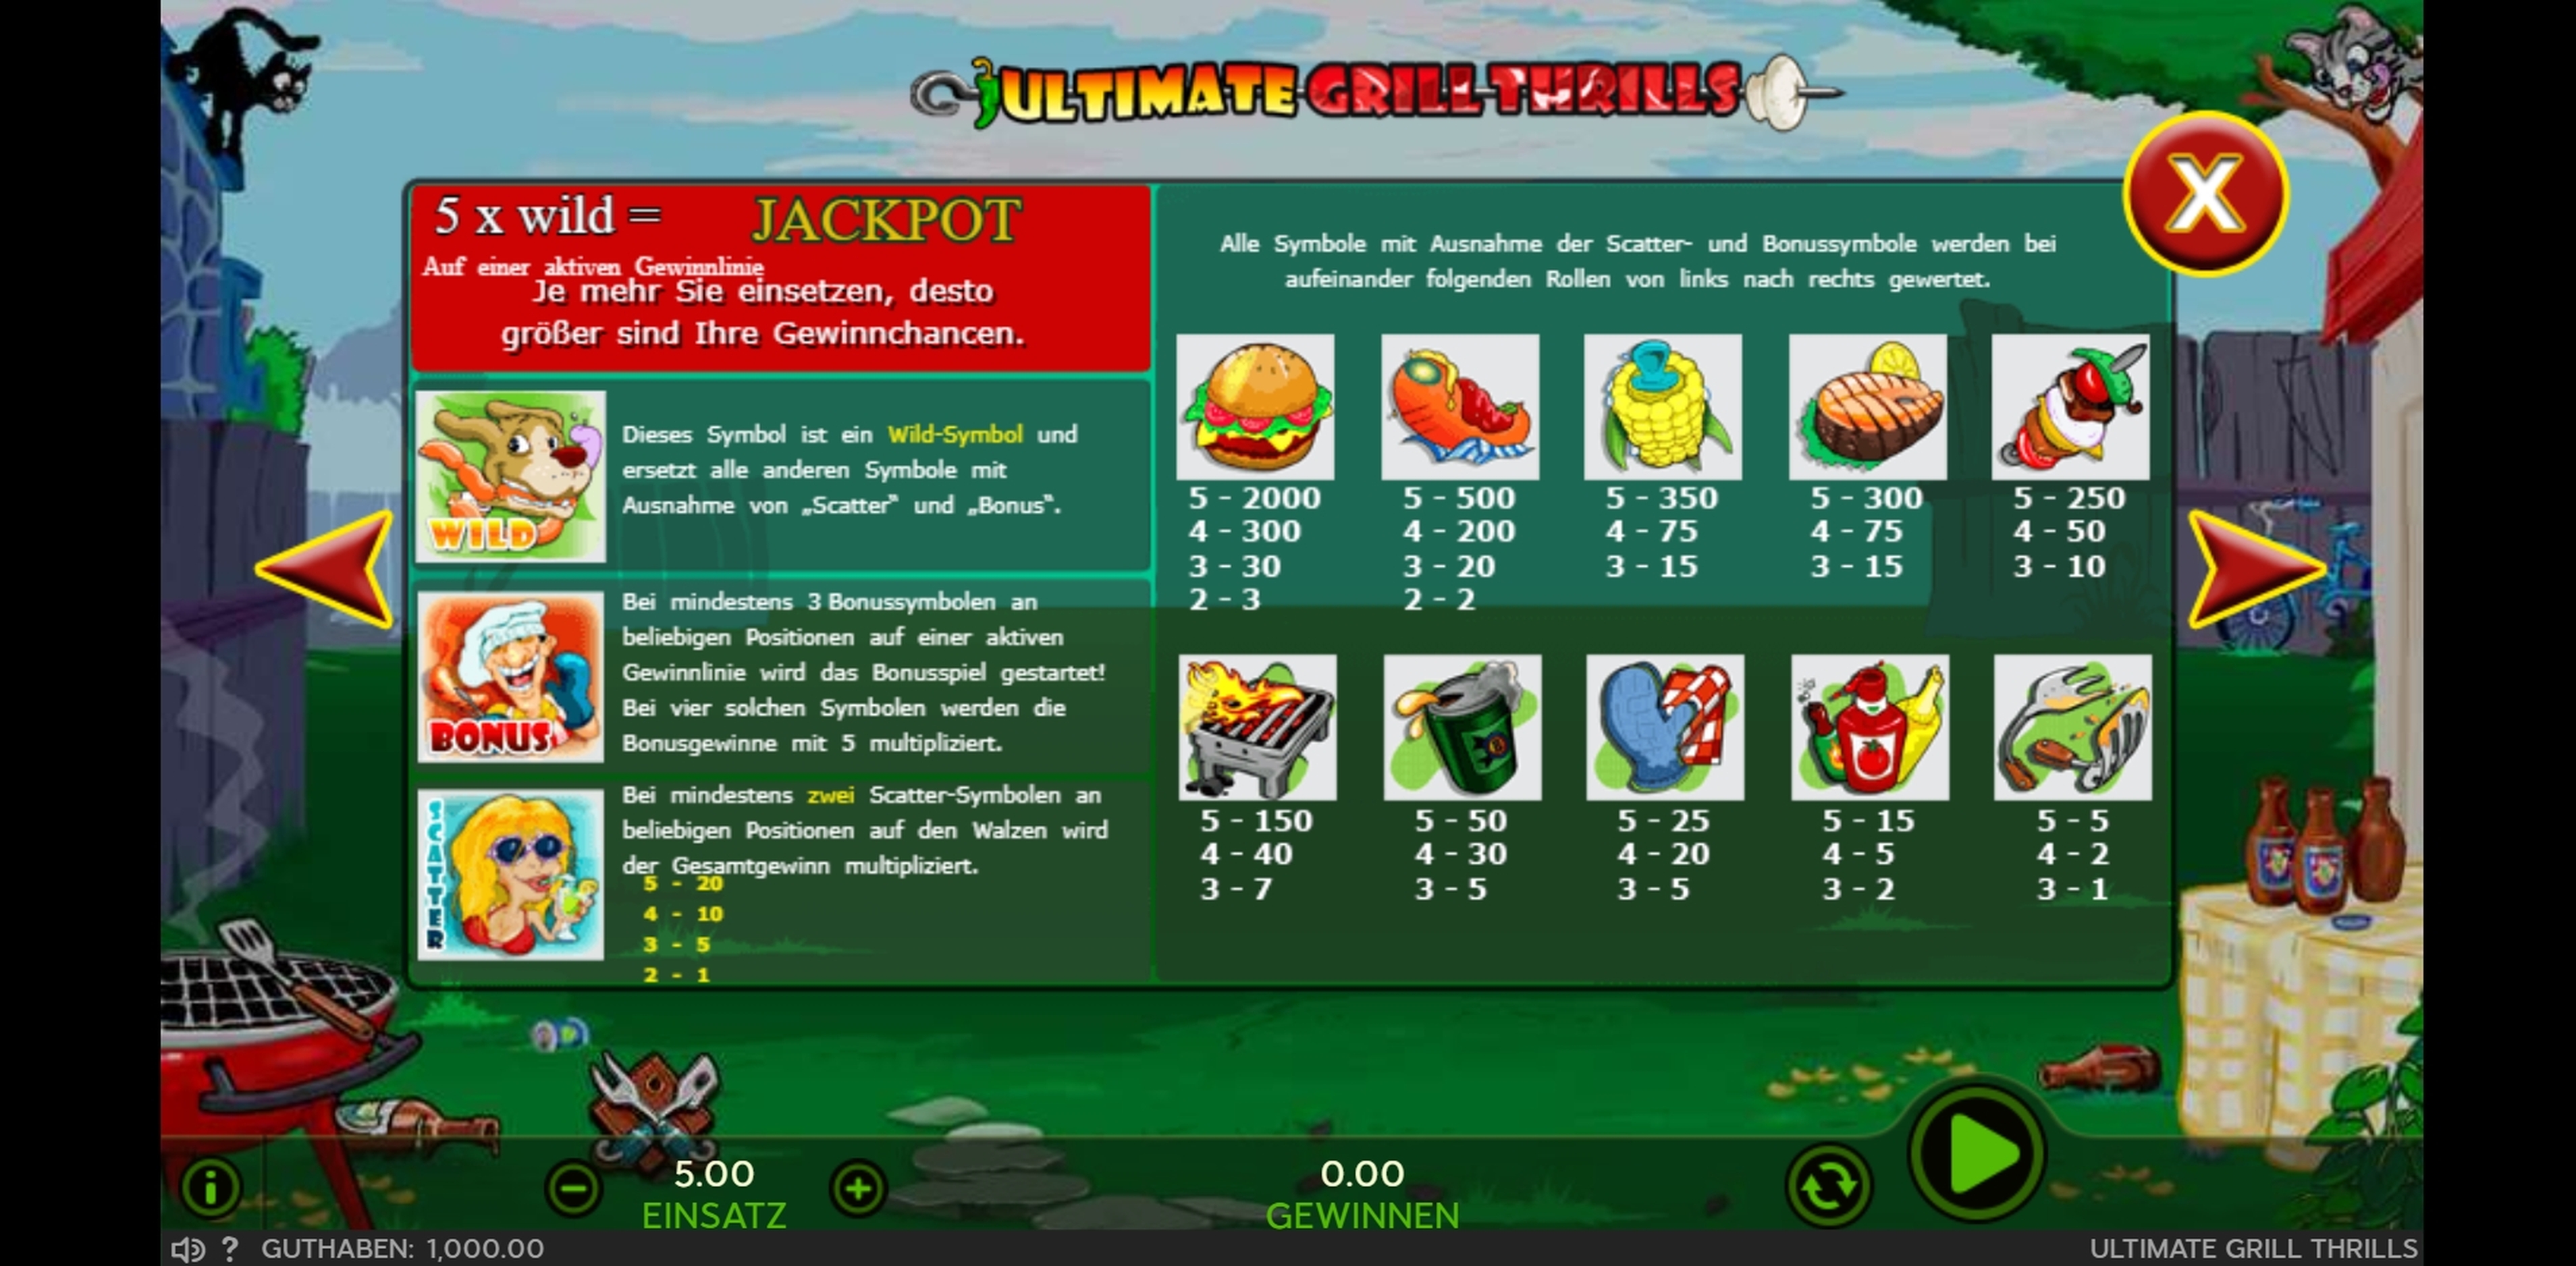 Info of Ultimate Grill Thrills Slot Game by 888 Gaming